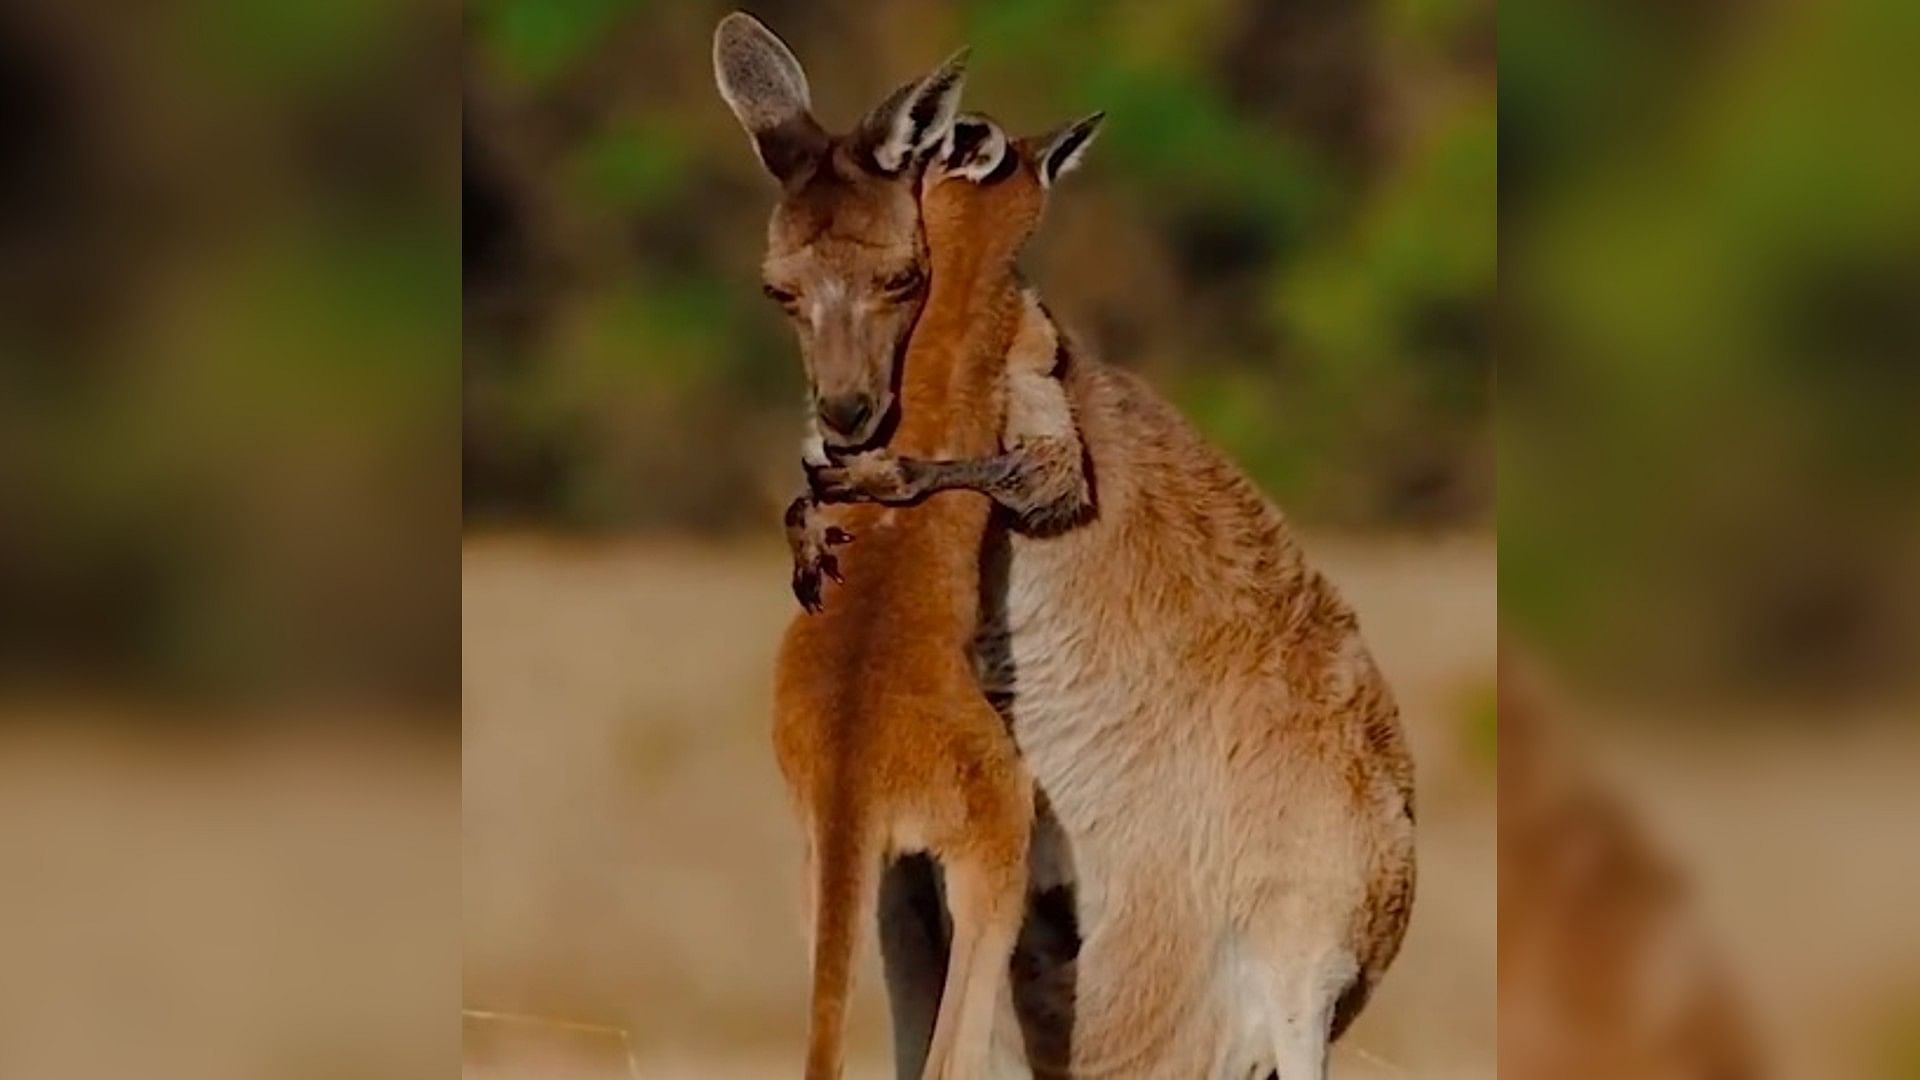 Viral Video kangaroo hugging and kissing its baby internet users got emotional with mother love